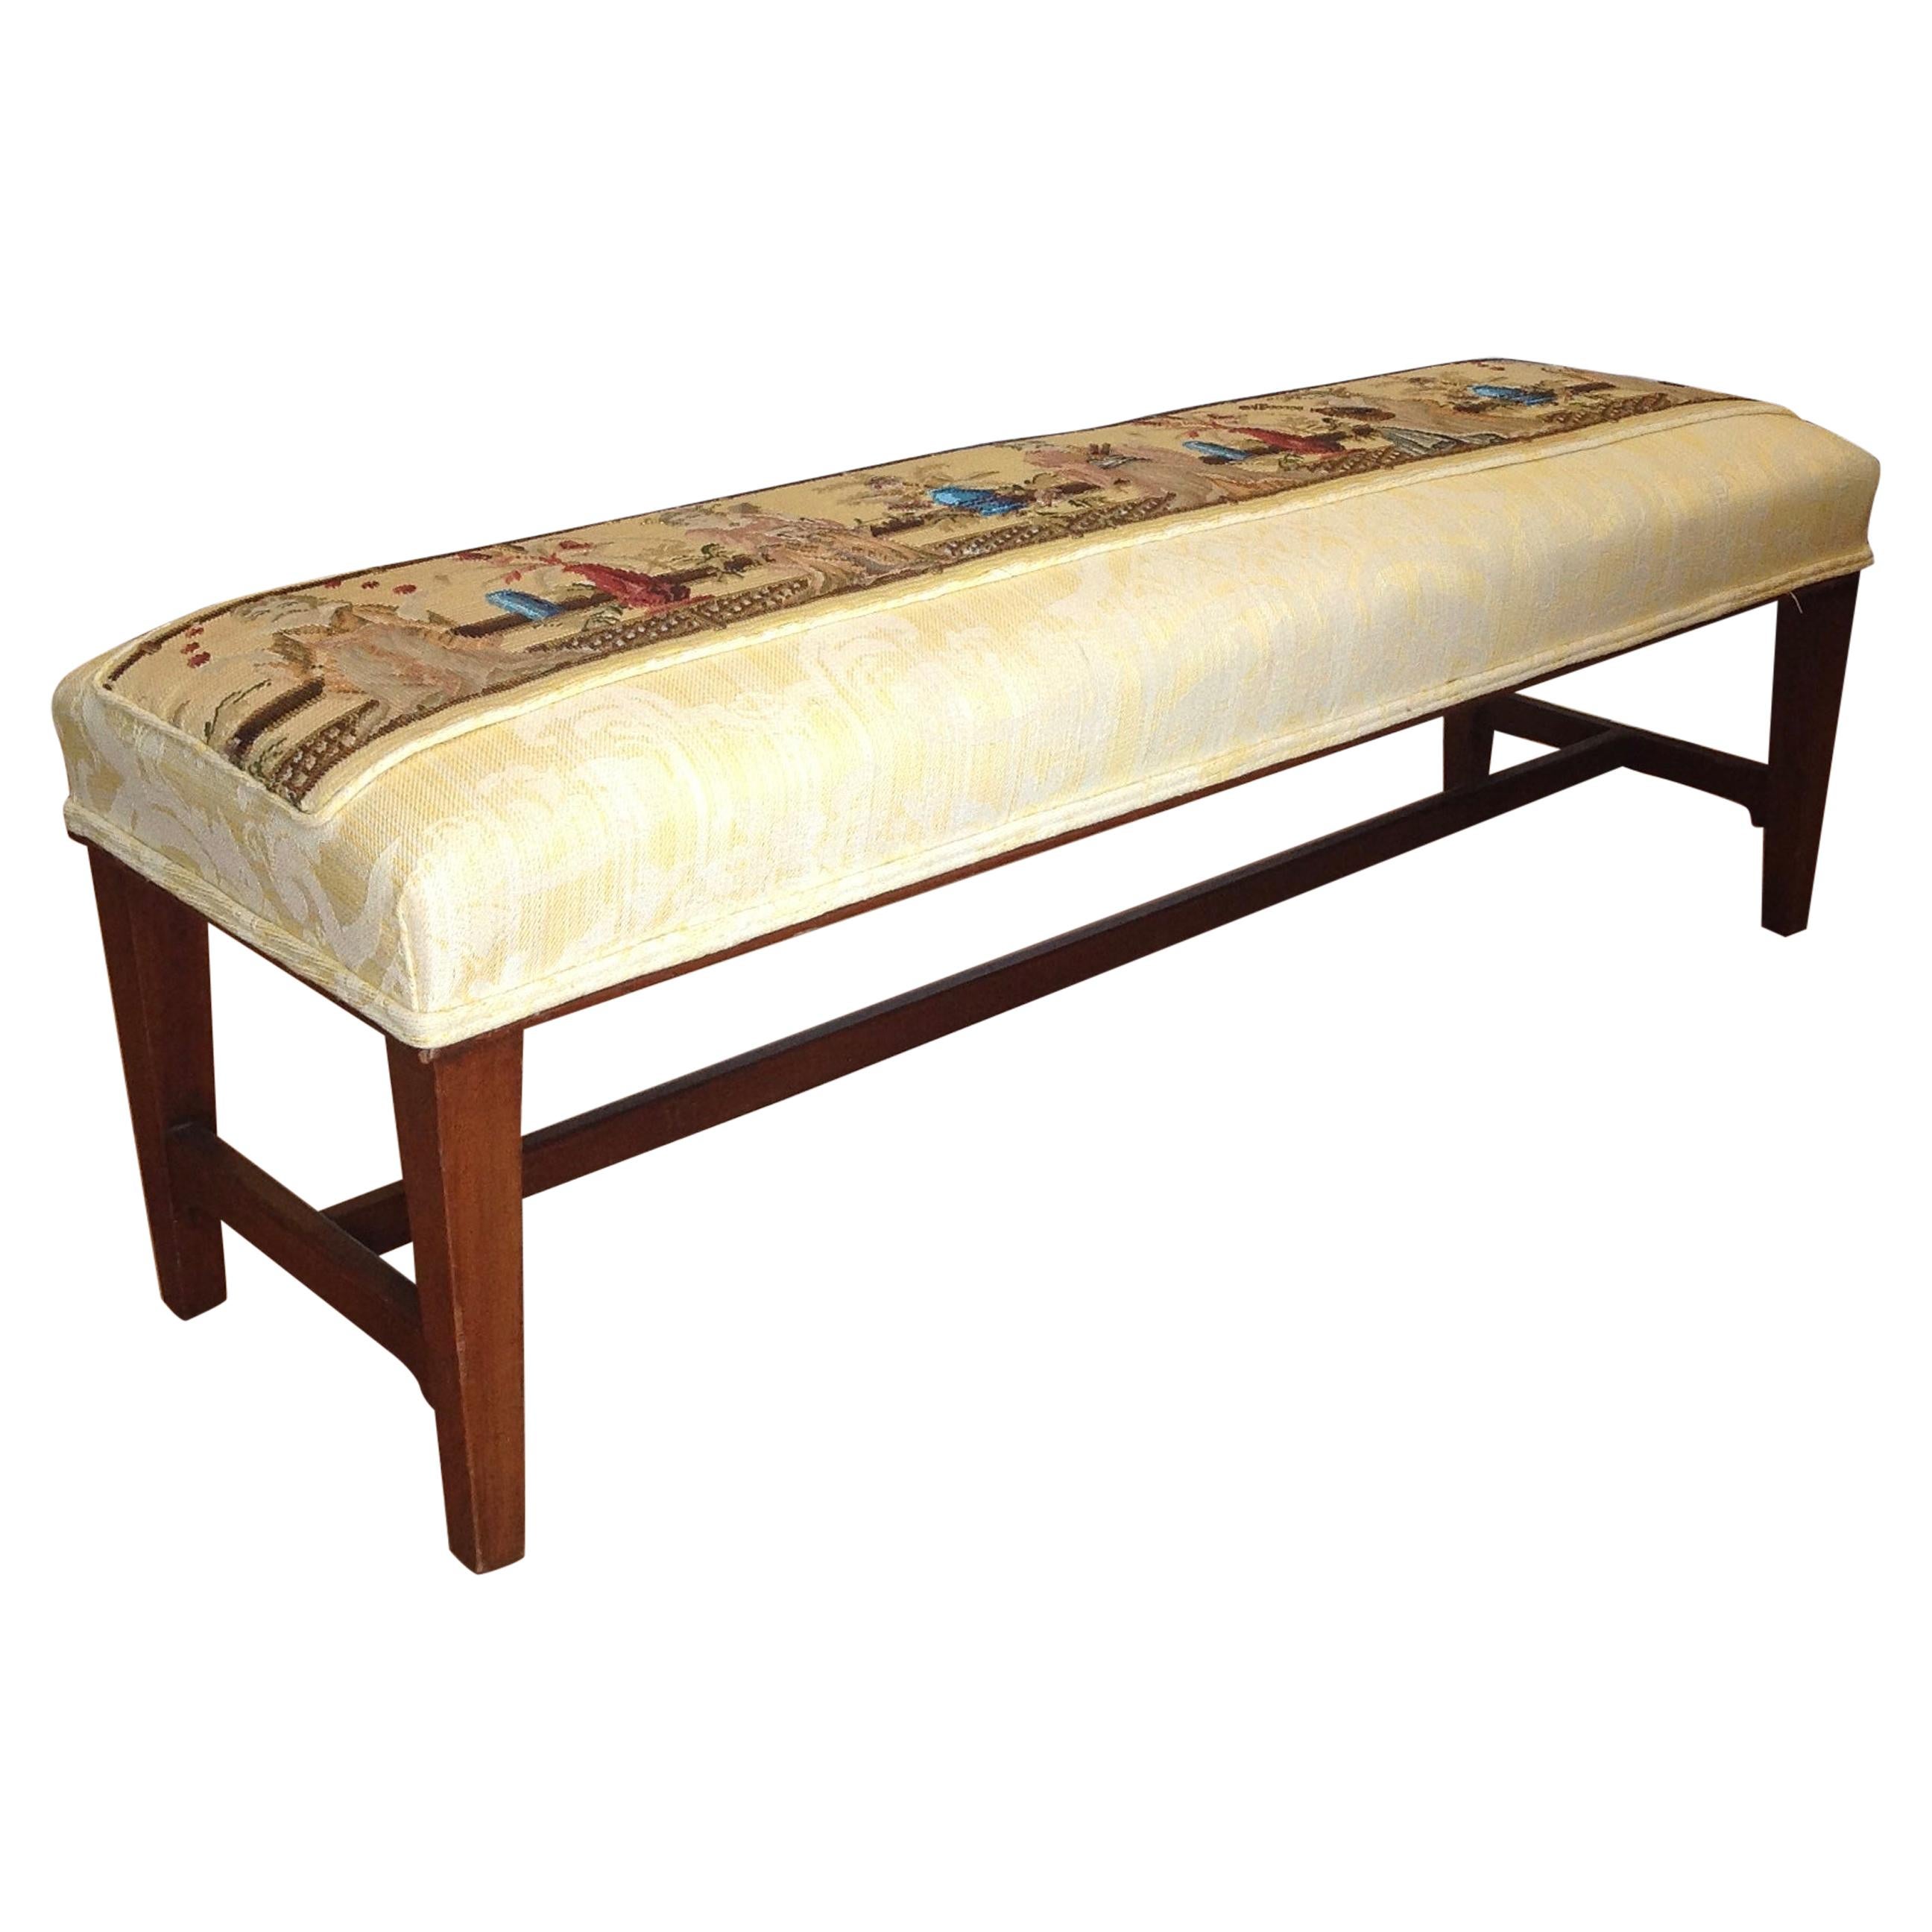 Chinoserie Appointed English Long Bench